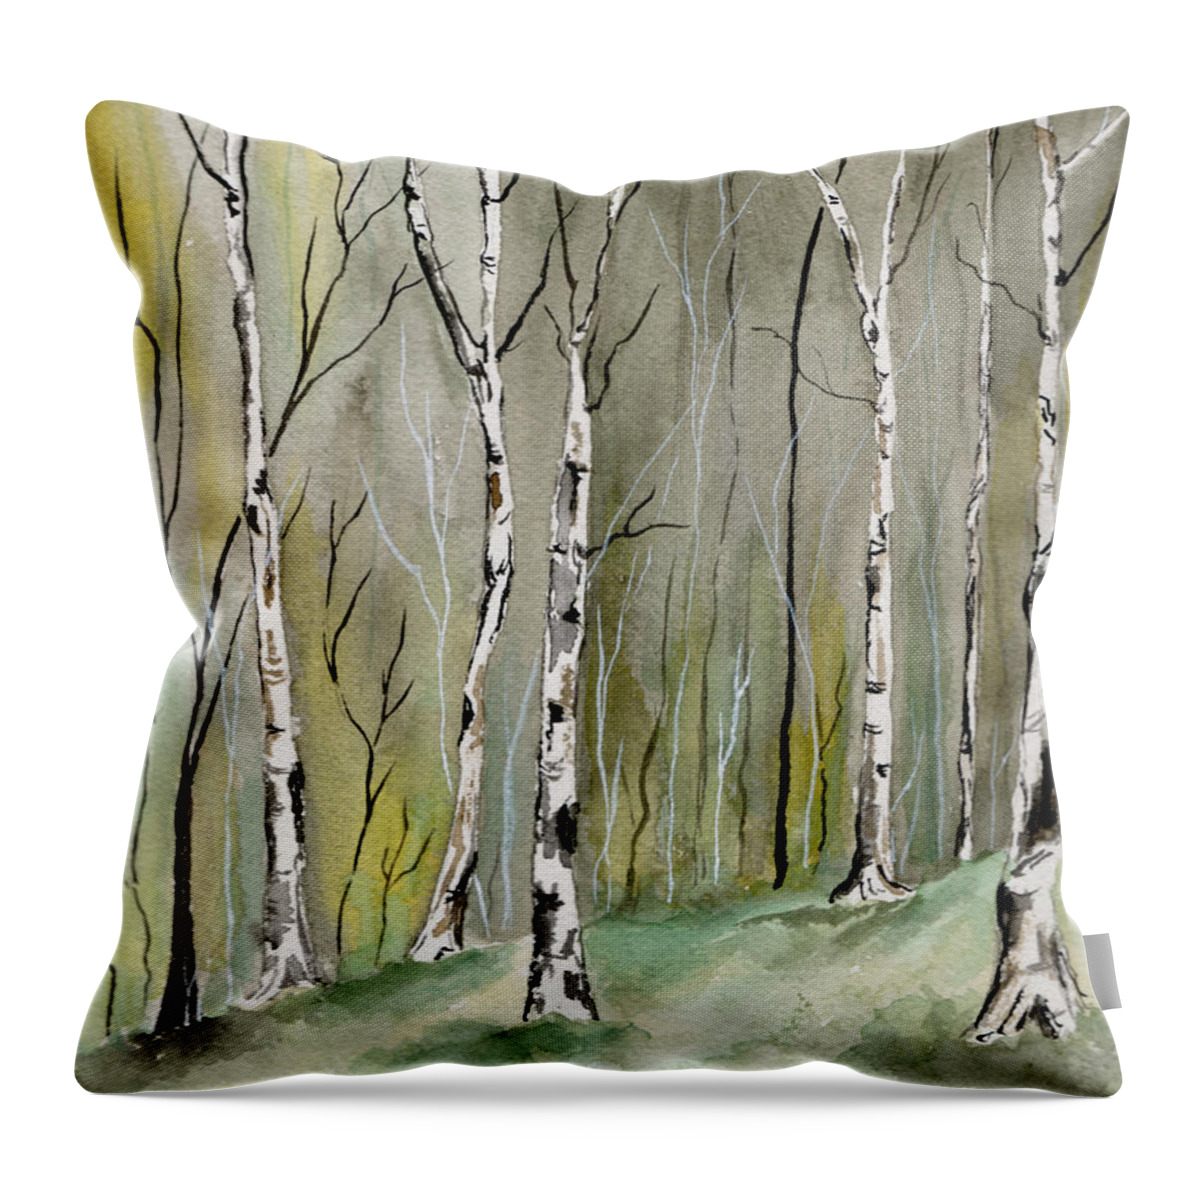 Landscape Throw Pillow featuring the painting Birches Before Spring by Brenda Owen